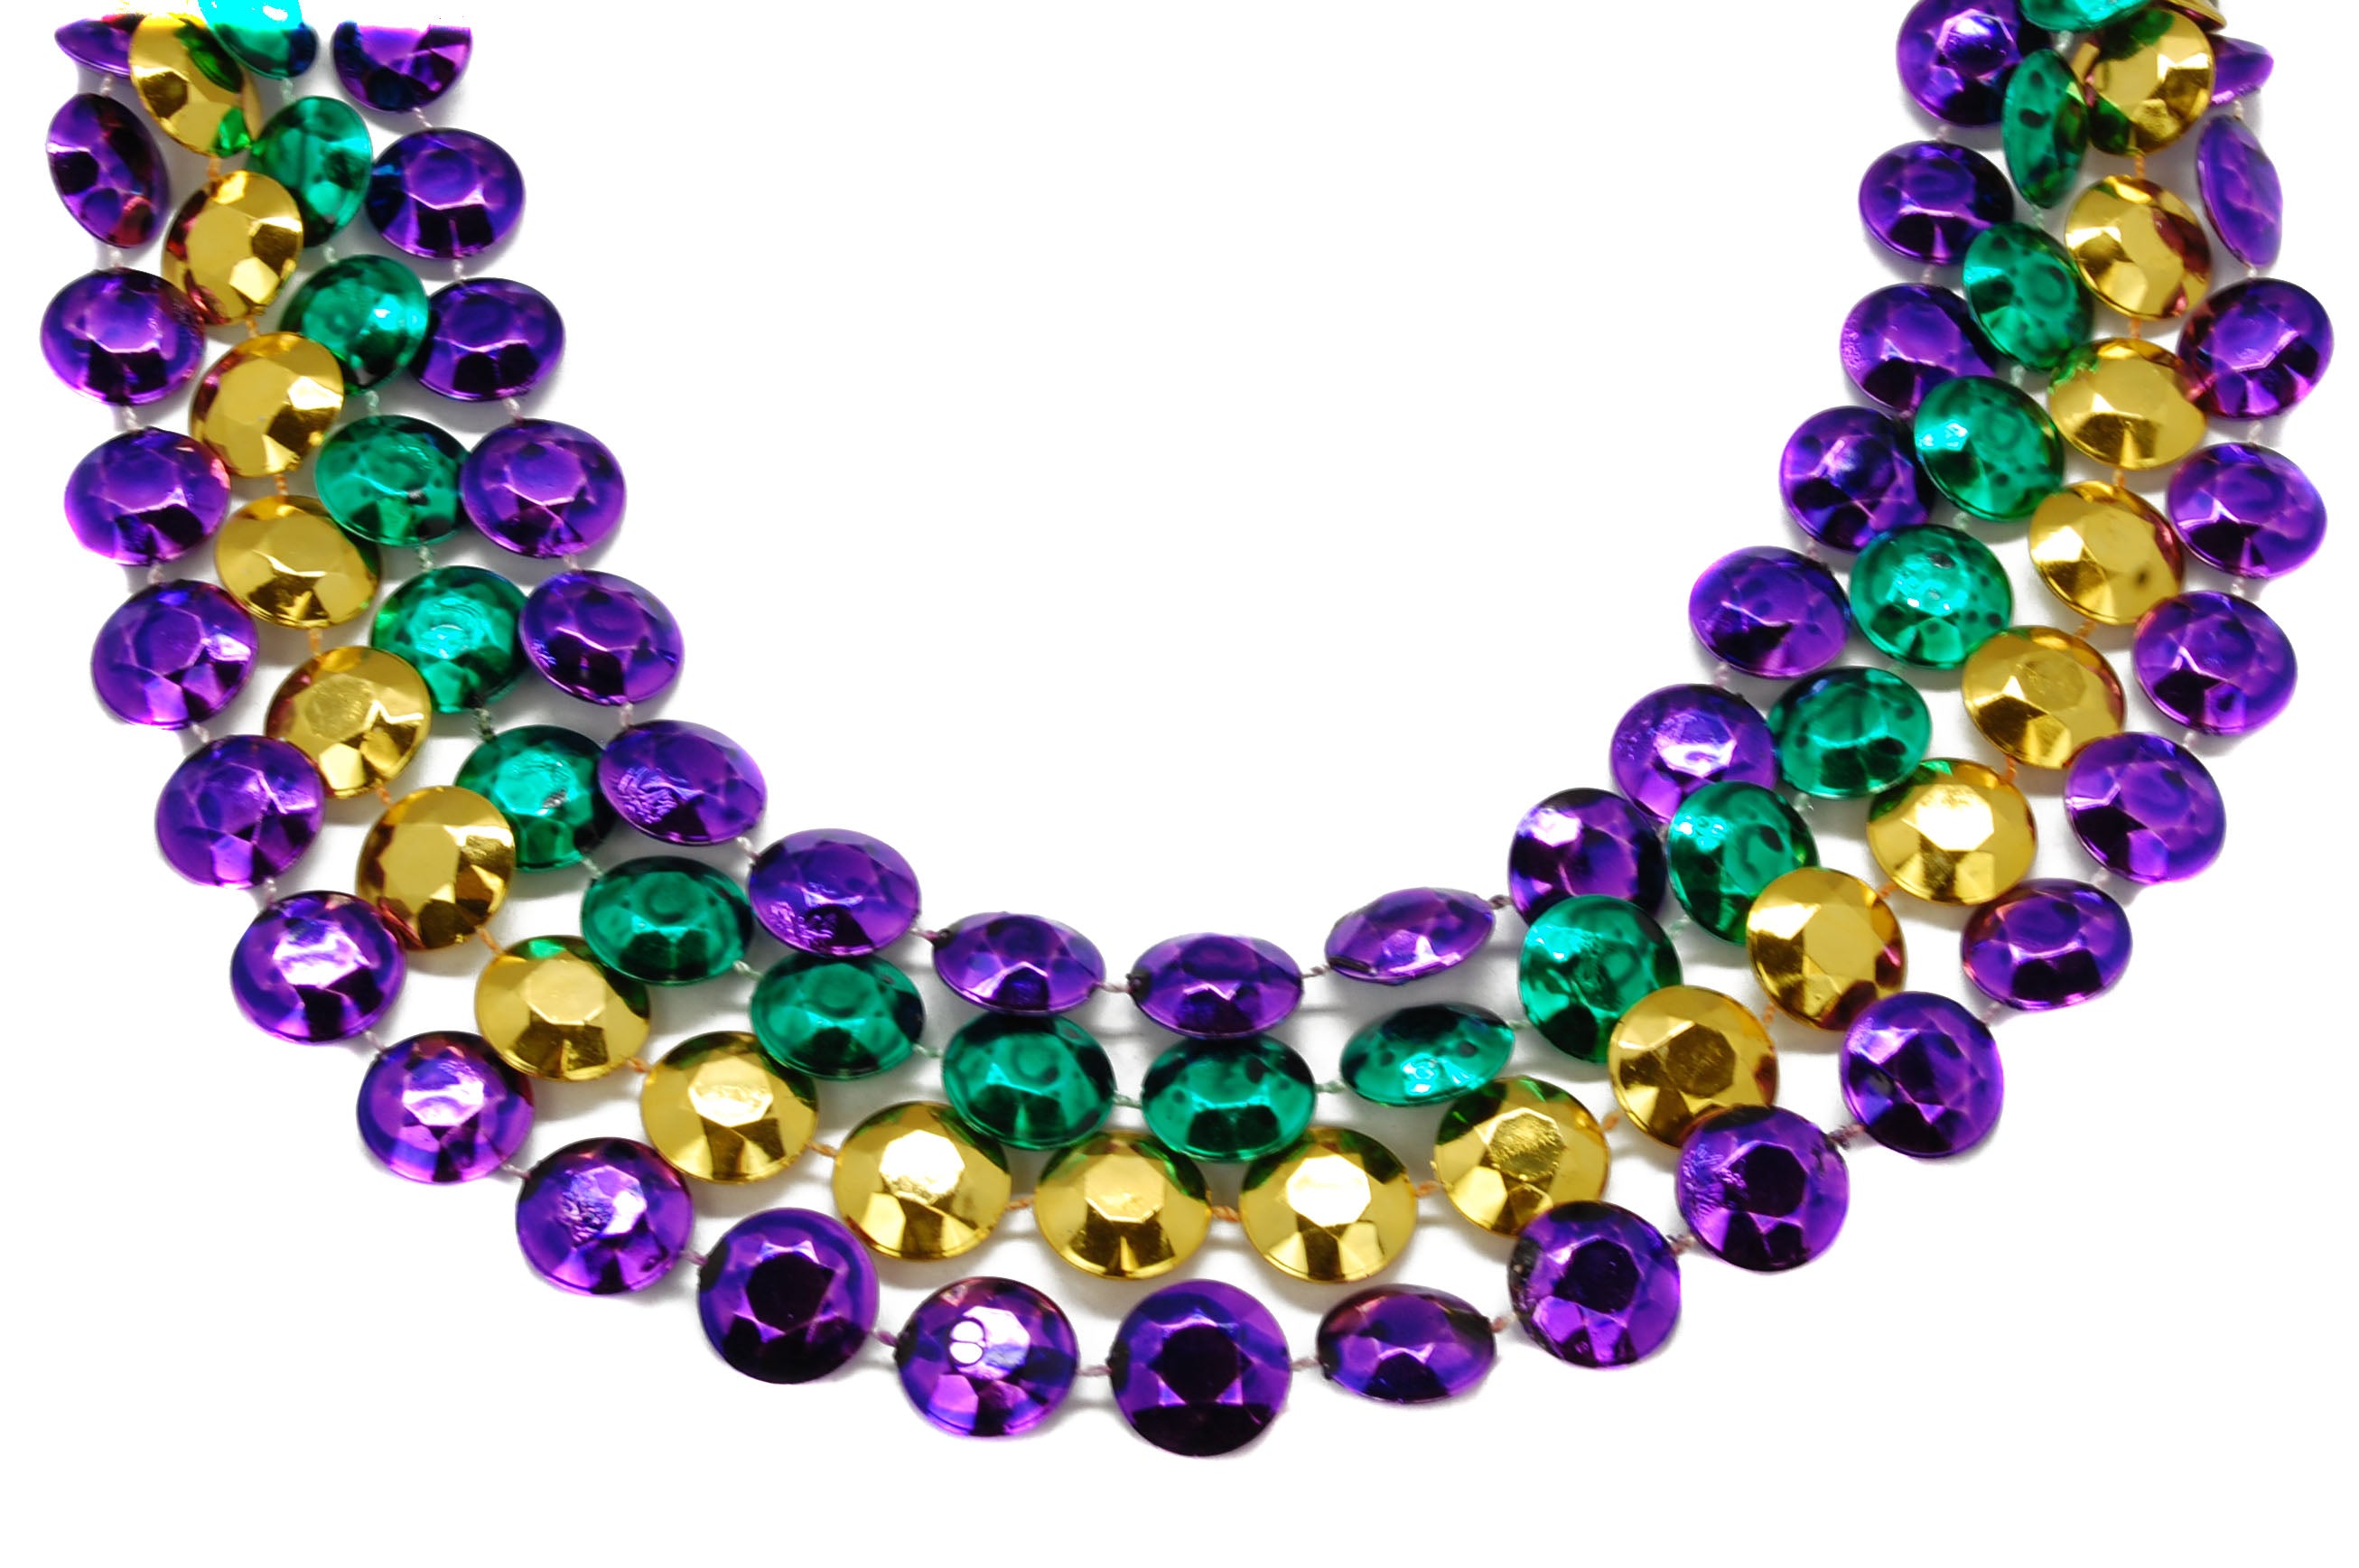 42 Giant Pearl Theme Beads - Big Mardi Gras Beads Beads from Beads by the  Dozen, New Orleans